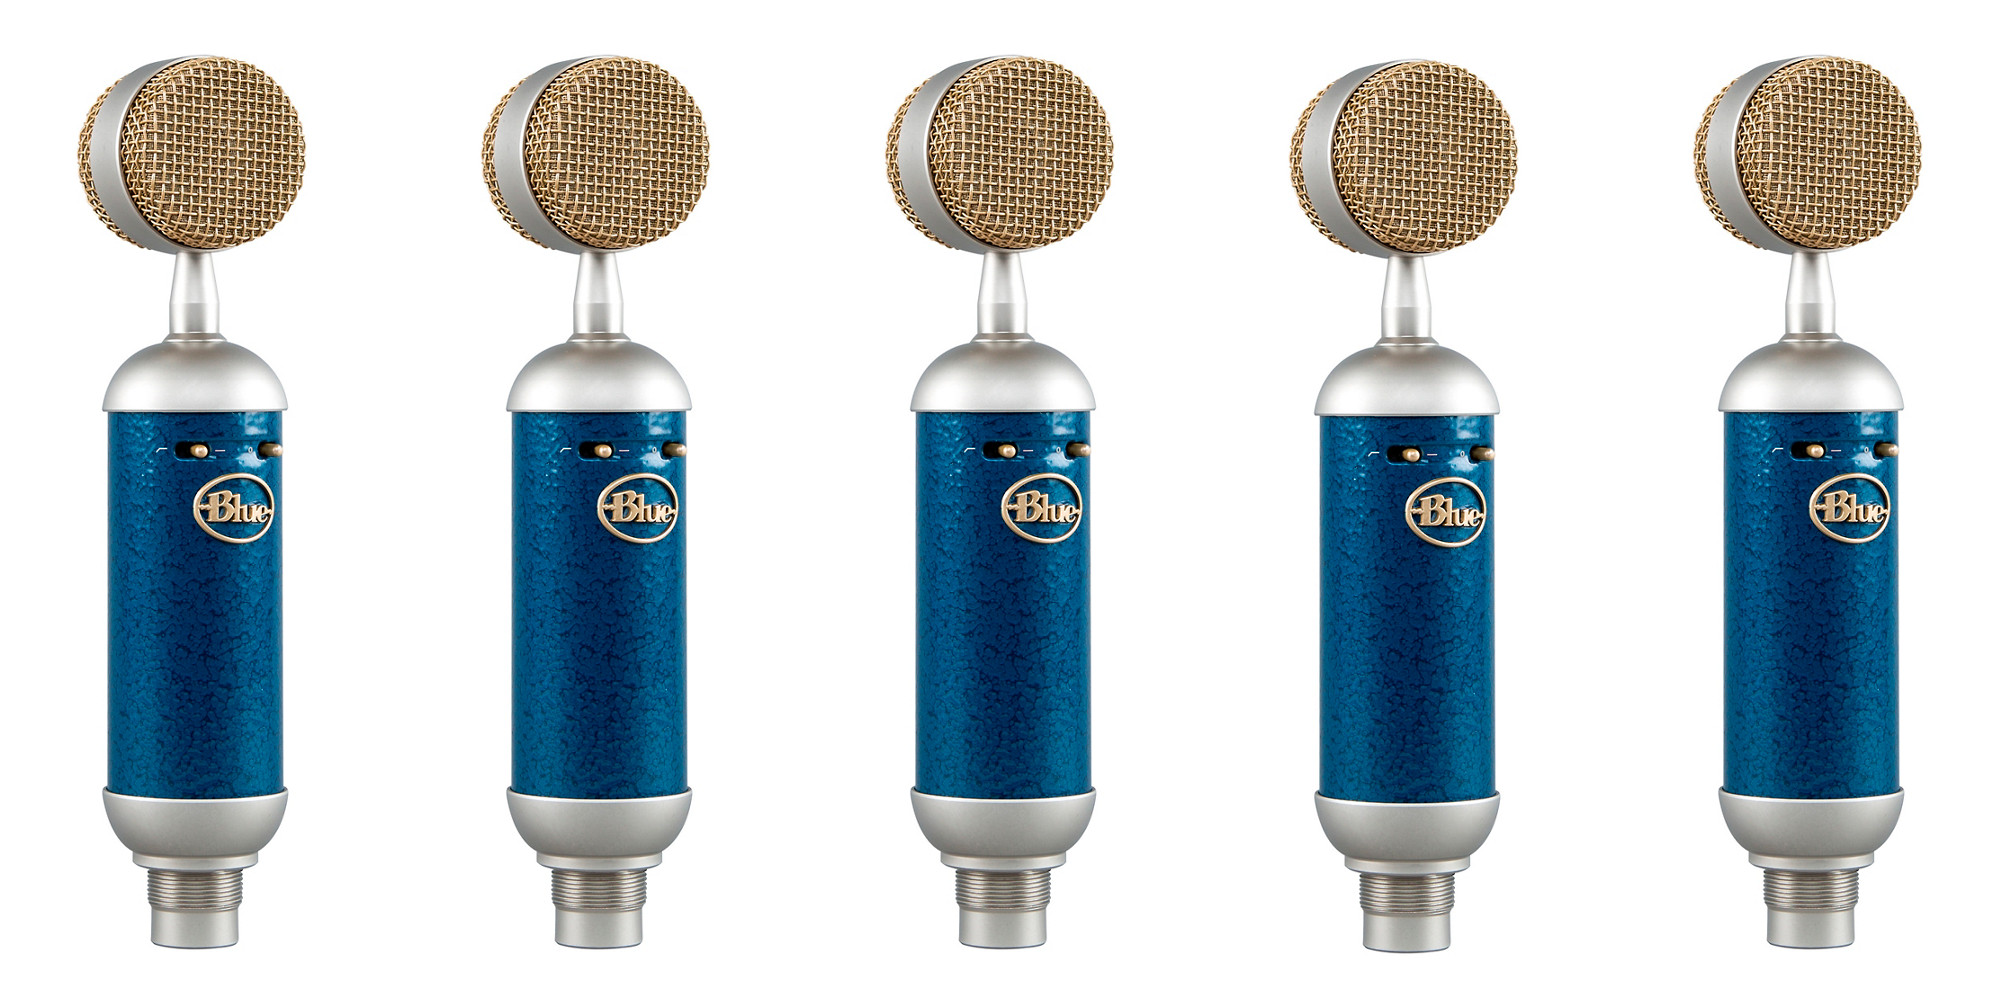 Blue's Spark SL Large-Diaphragm Condenser Mic is $140 (Today only